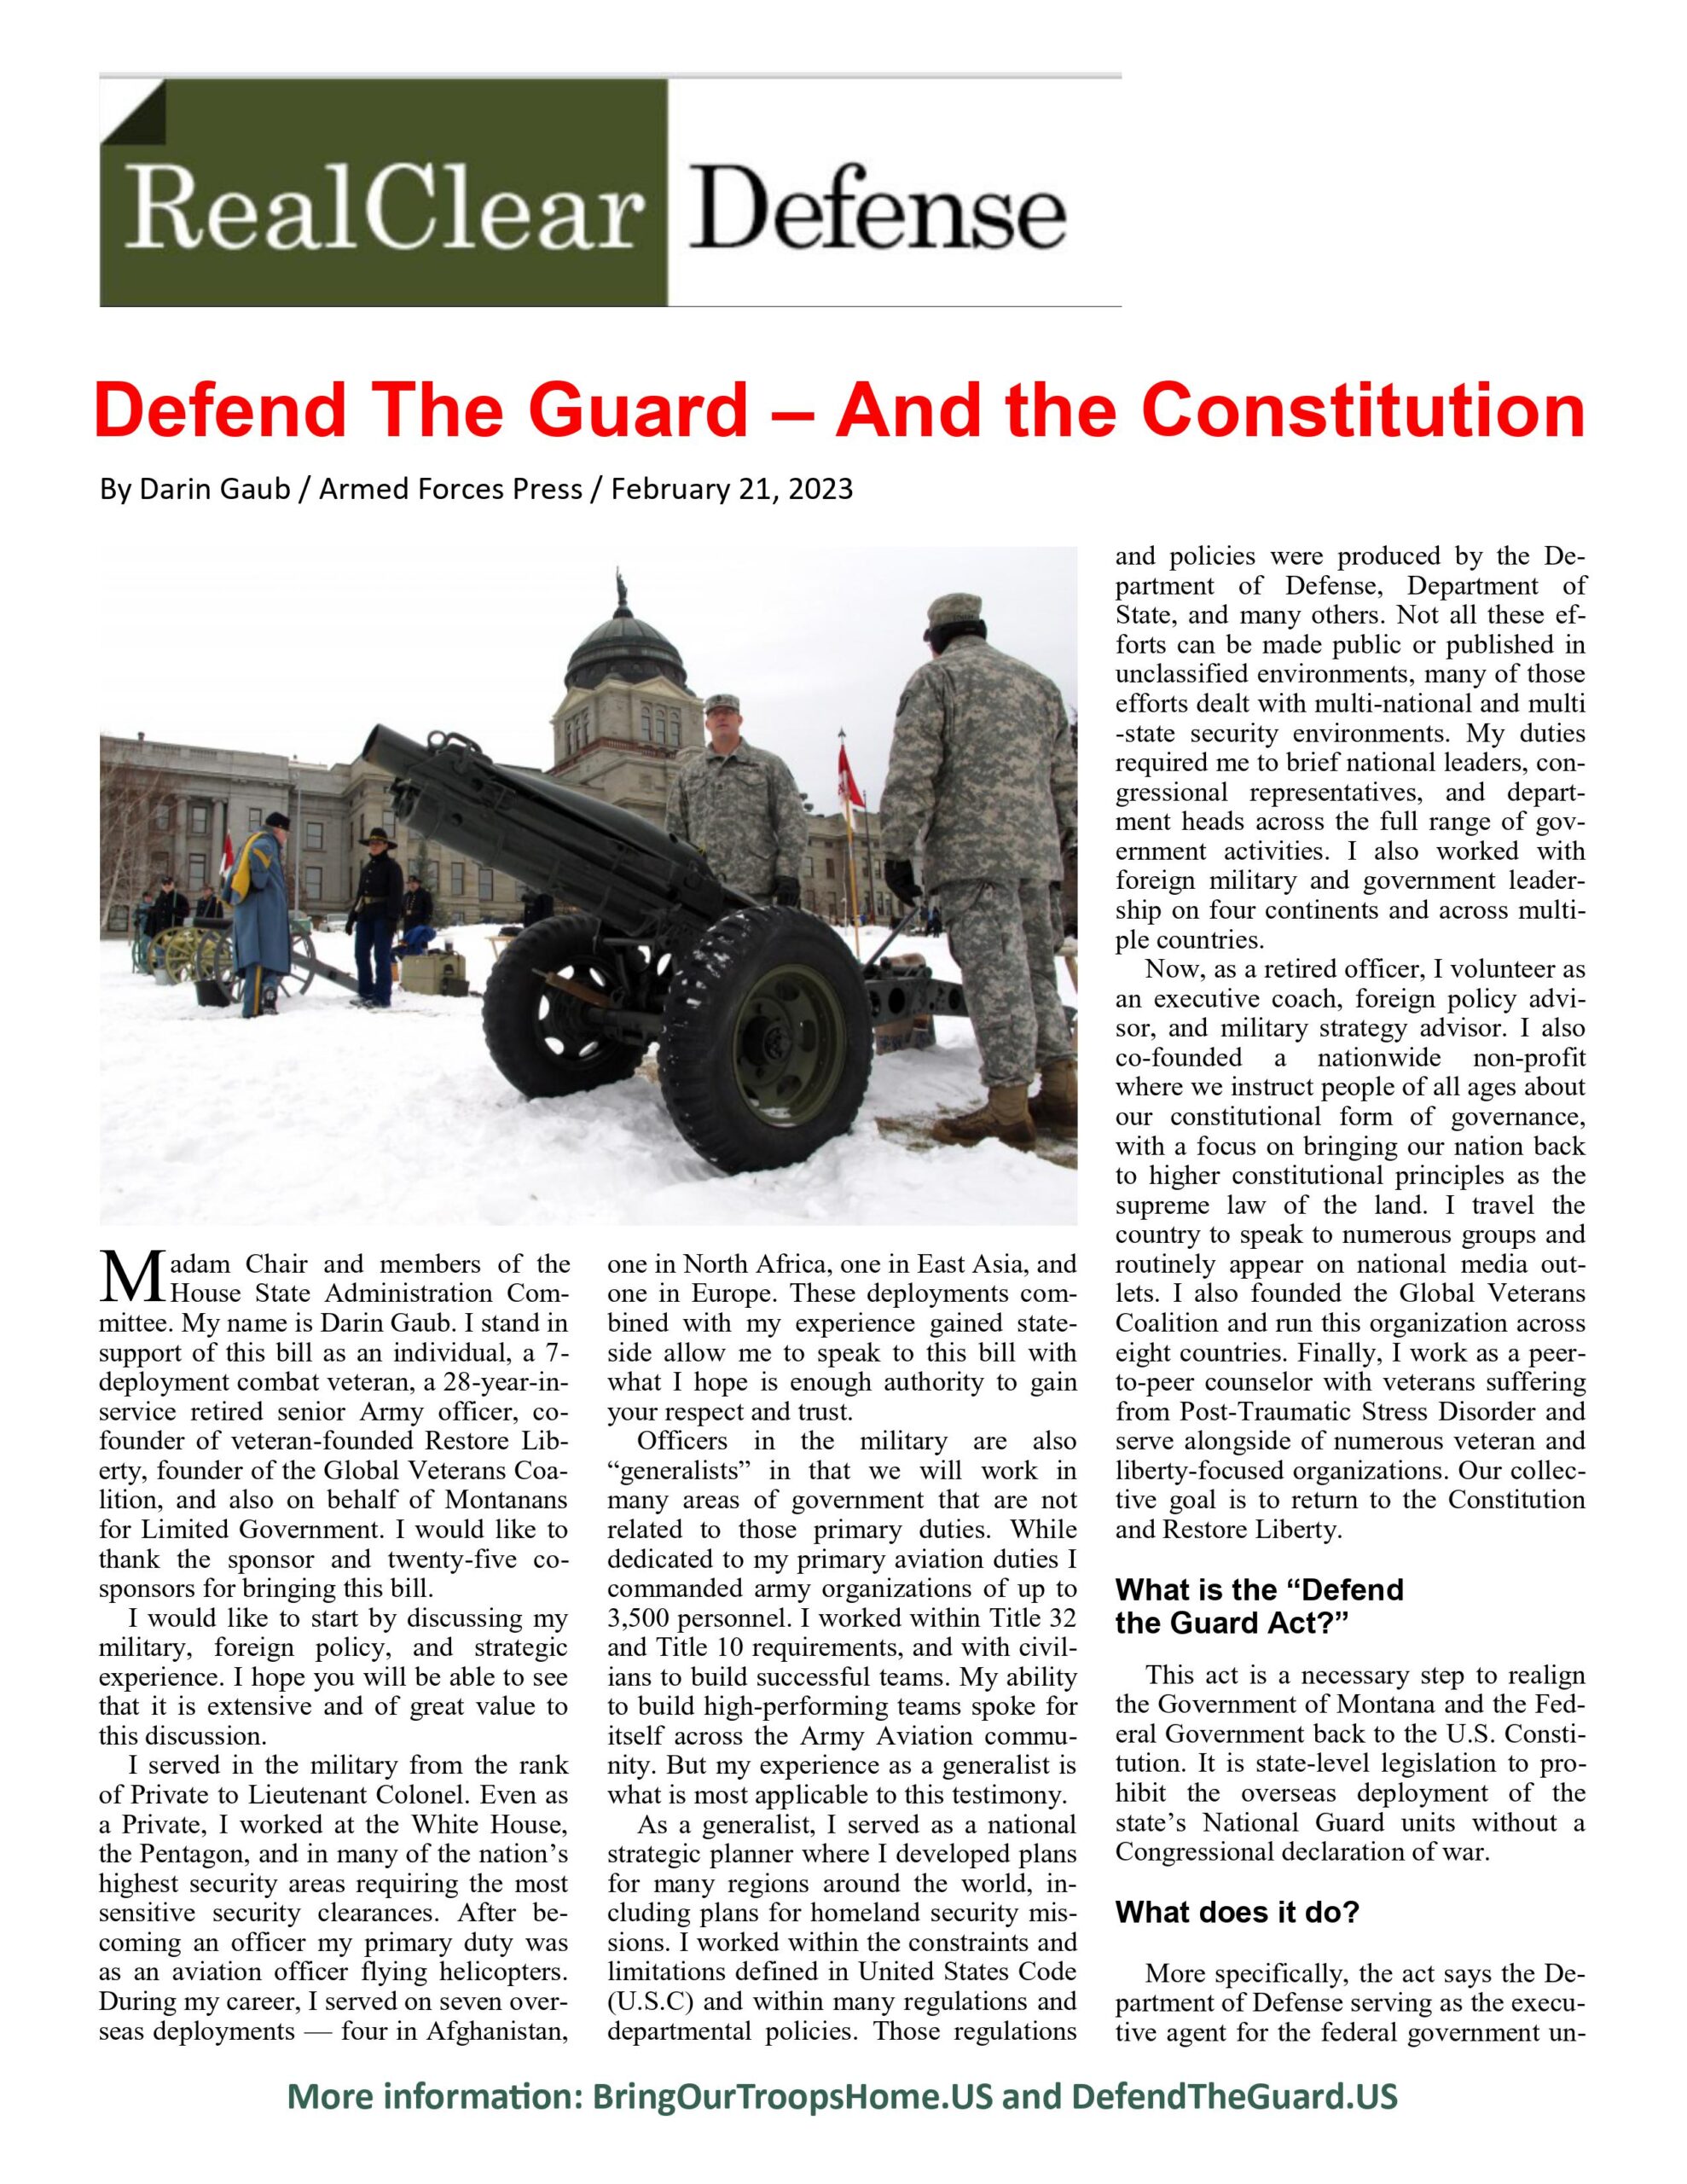 Defend the Guard – And the Constitution